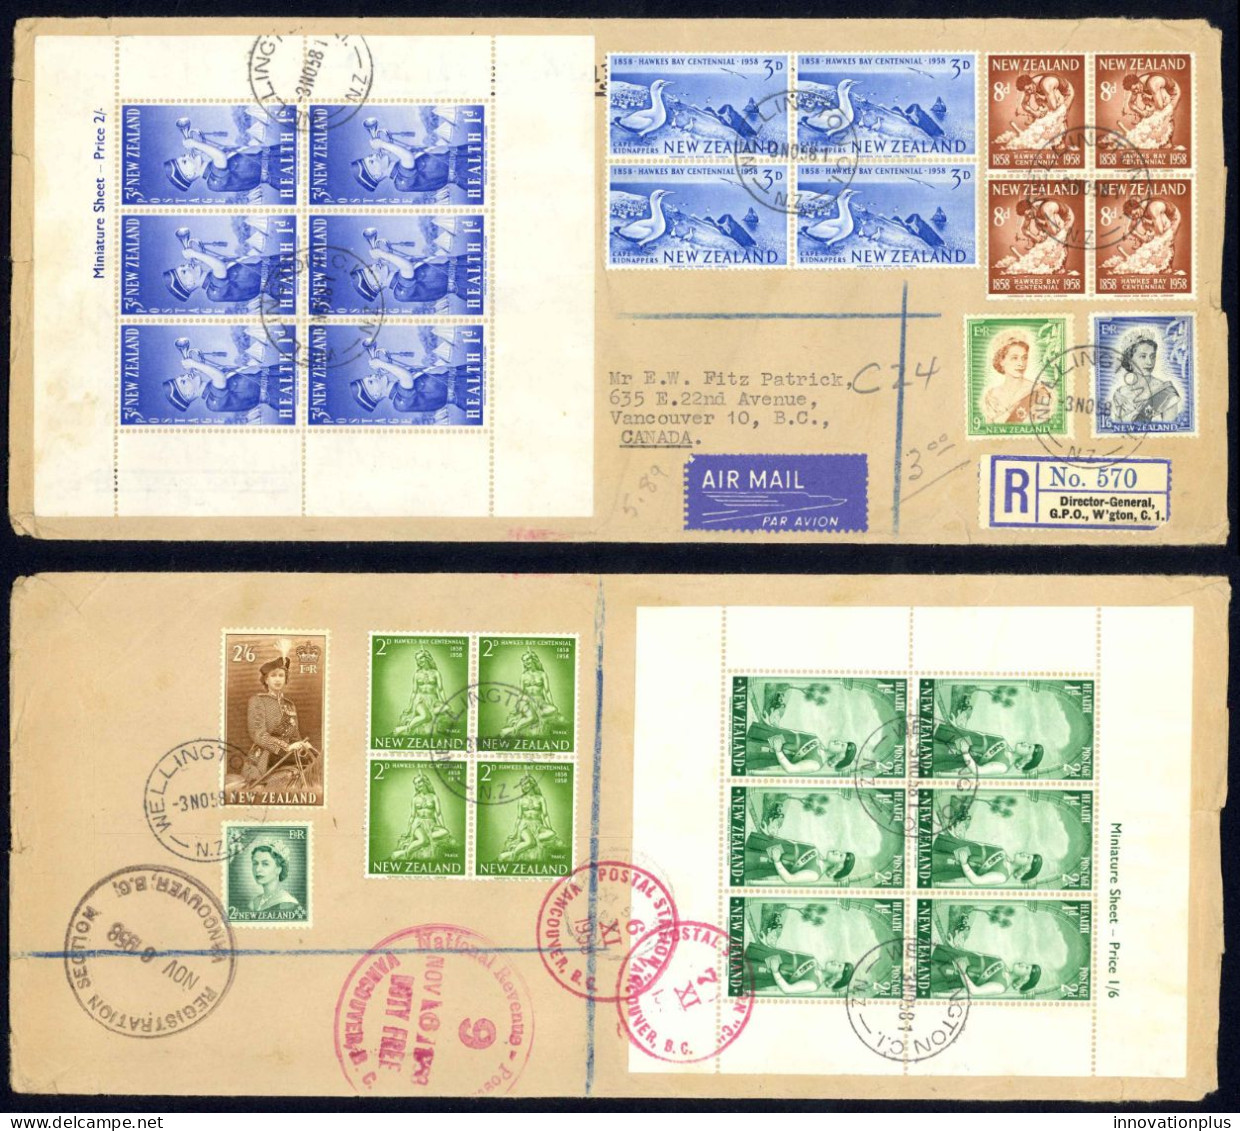 New Zealand Sc# B54a-298B Used Cover (Reg Air Mail) 1958 11.3 Life Brigade Cadet - Used Stamps